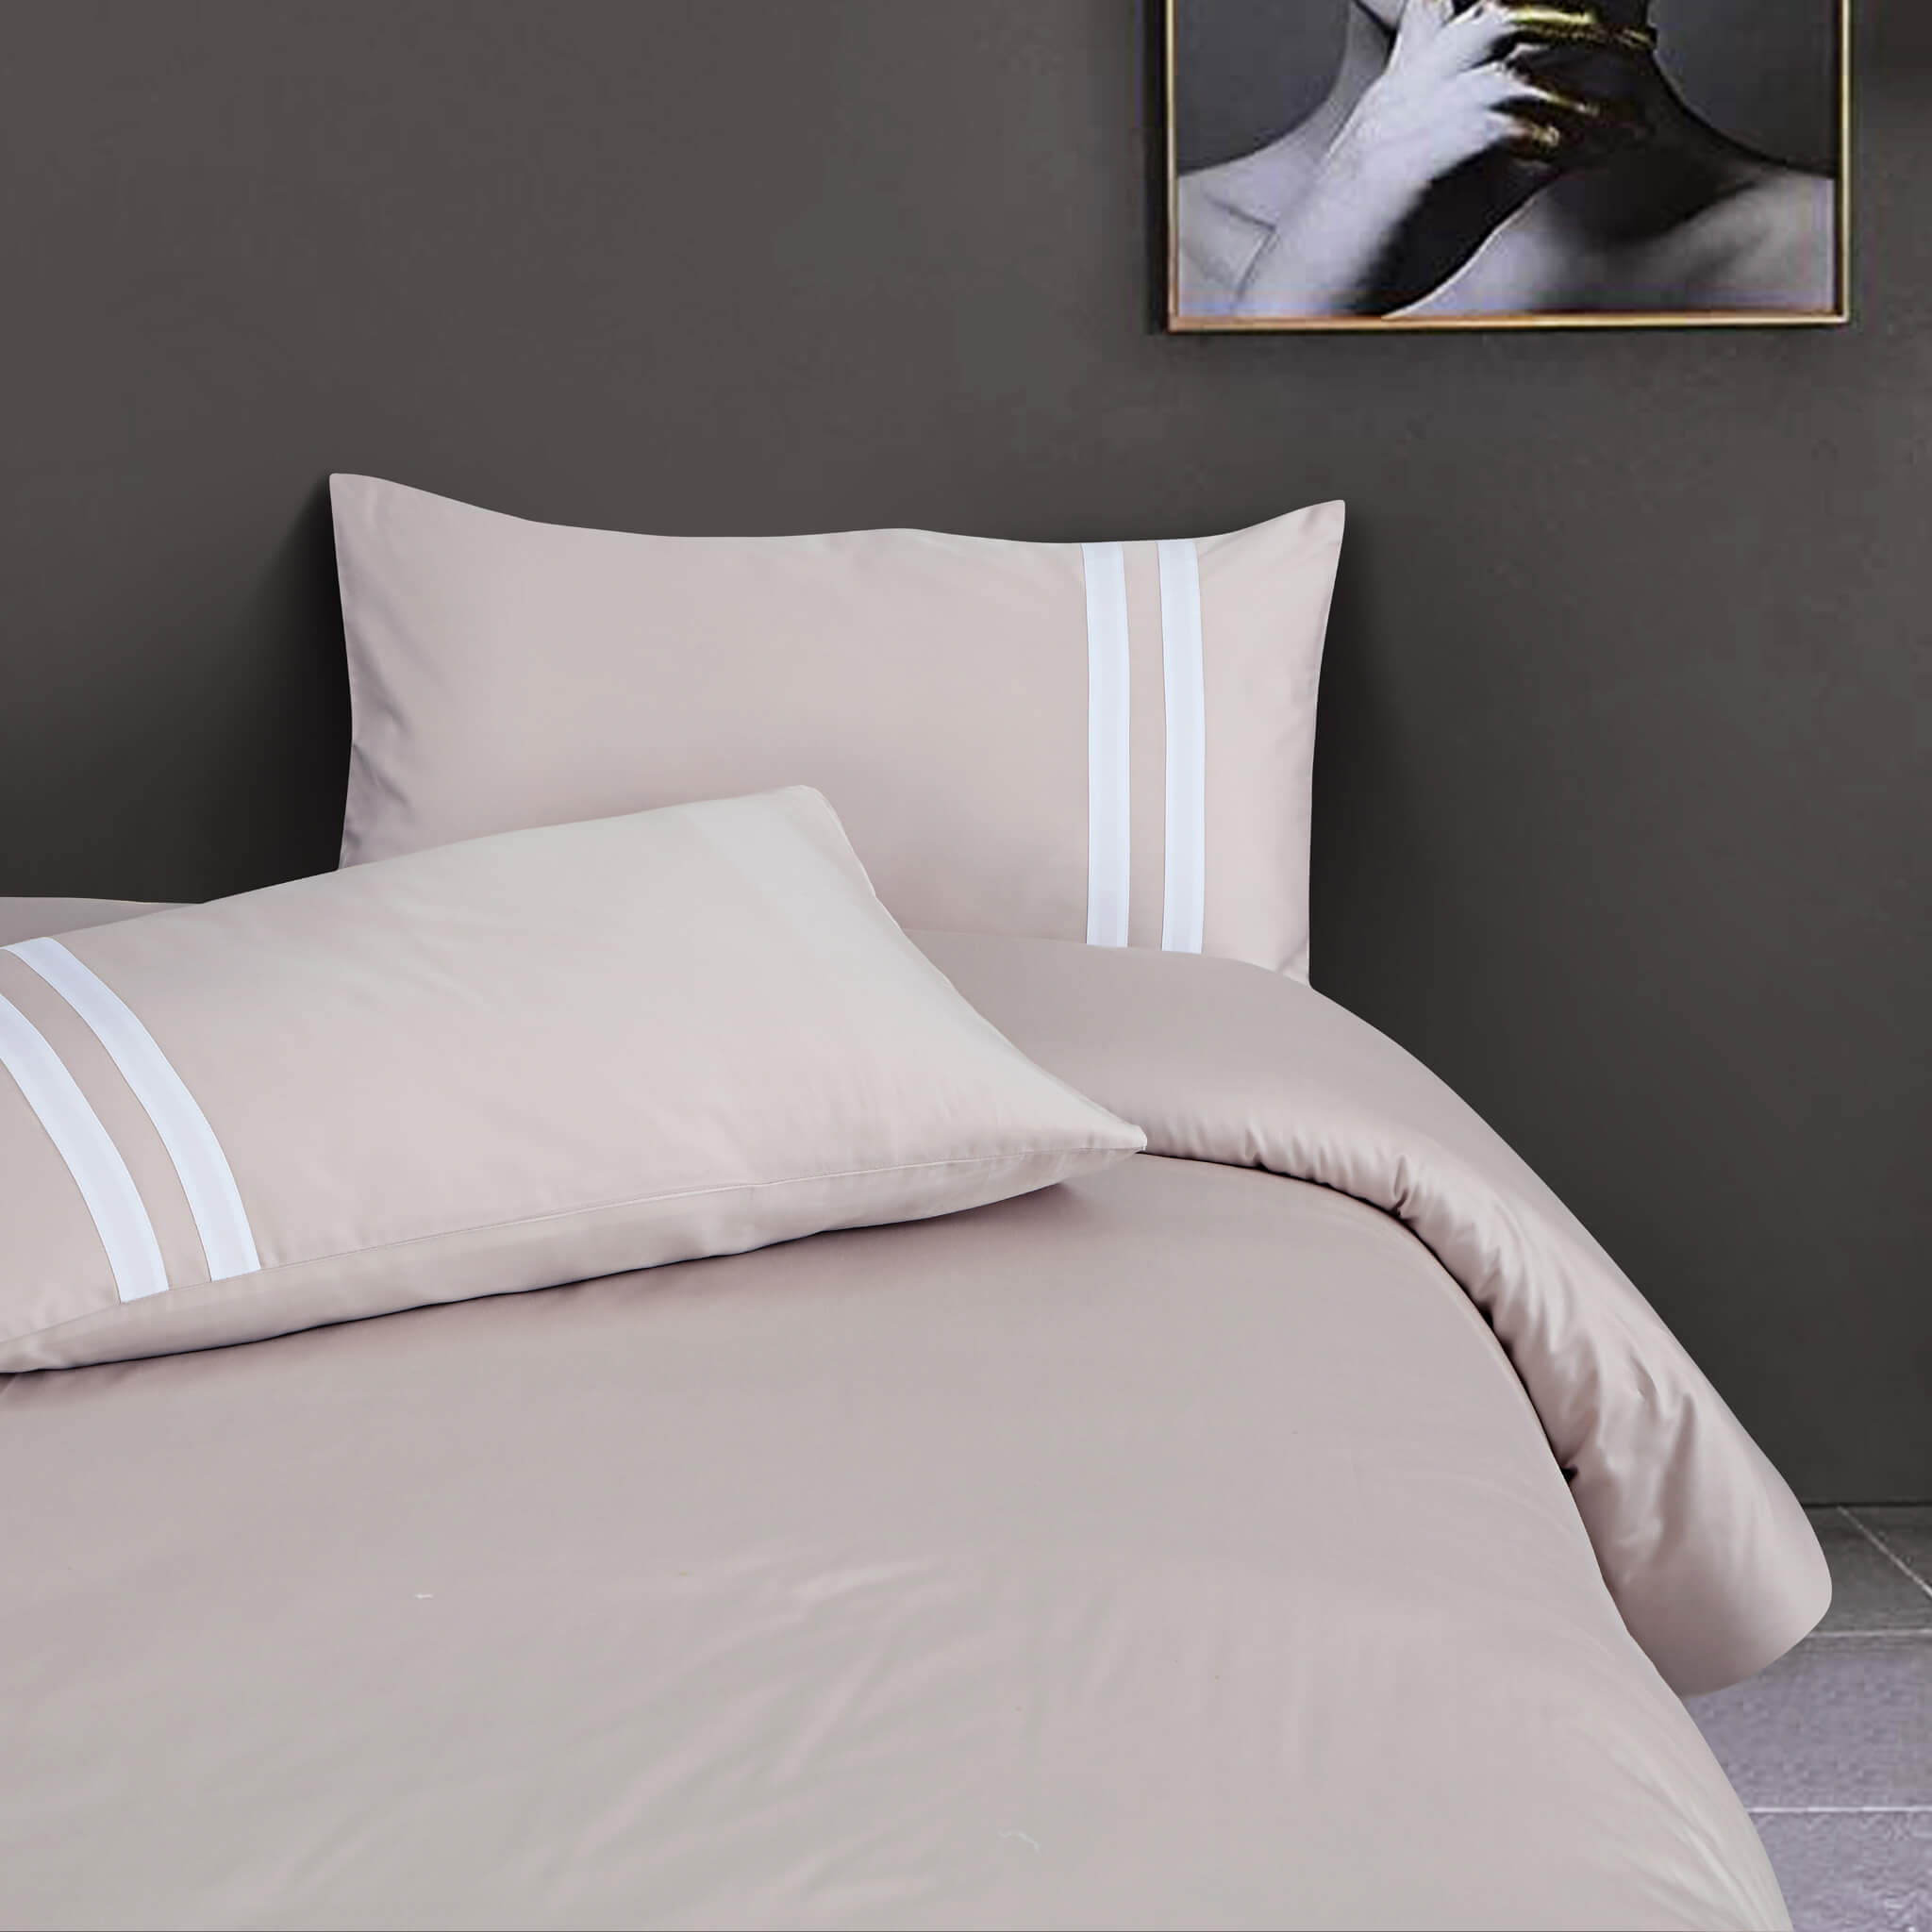 Malako Vivid Striped Solid Beige 500 TC King Size 100% Cotton Bed Sheet With 2 Pillow Covers with Stripes - MALAKO